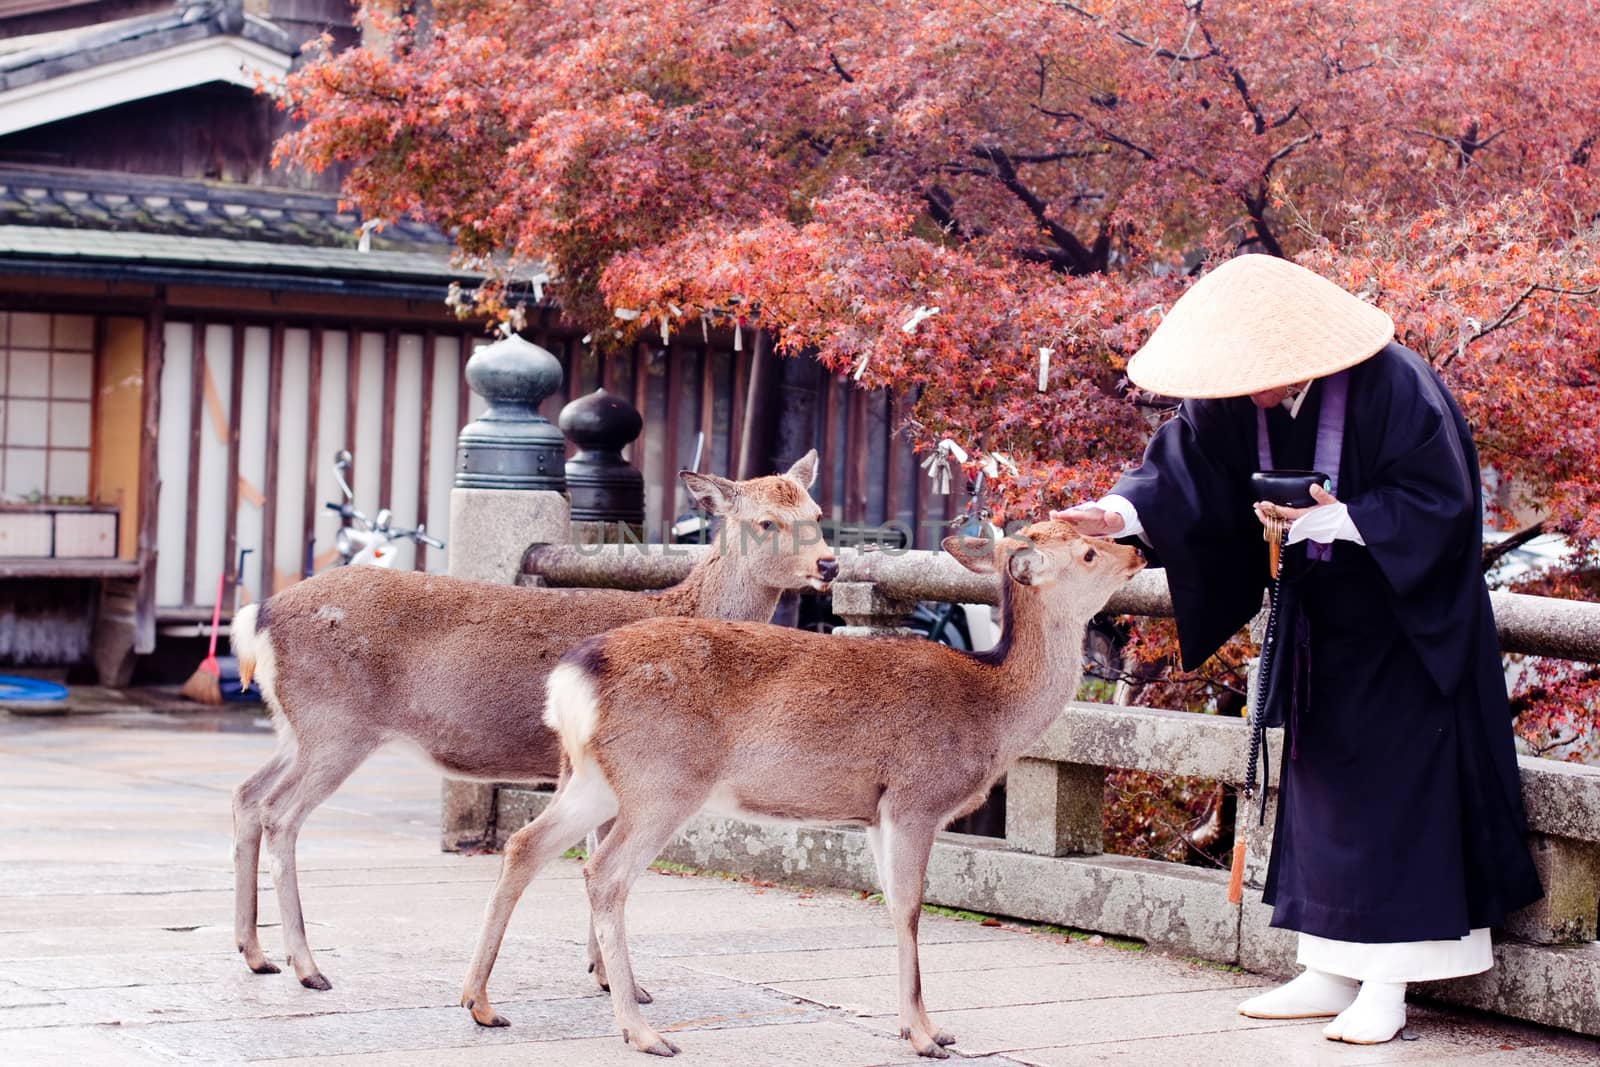 A buddhist monk and two deers in an autumn park
